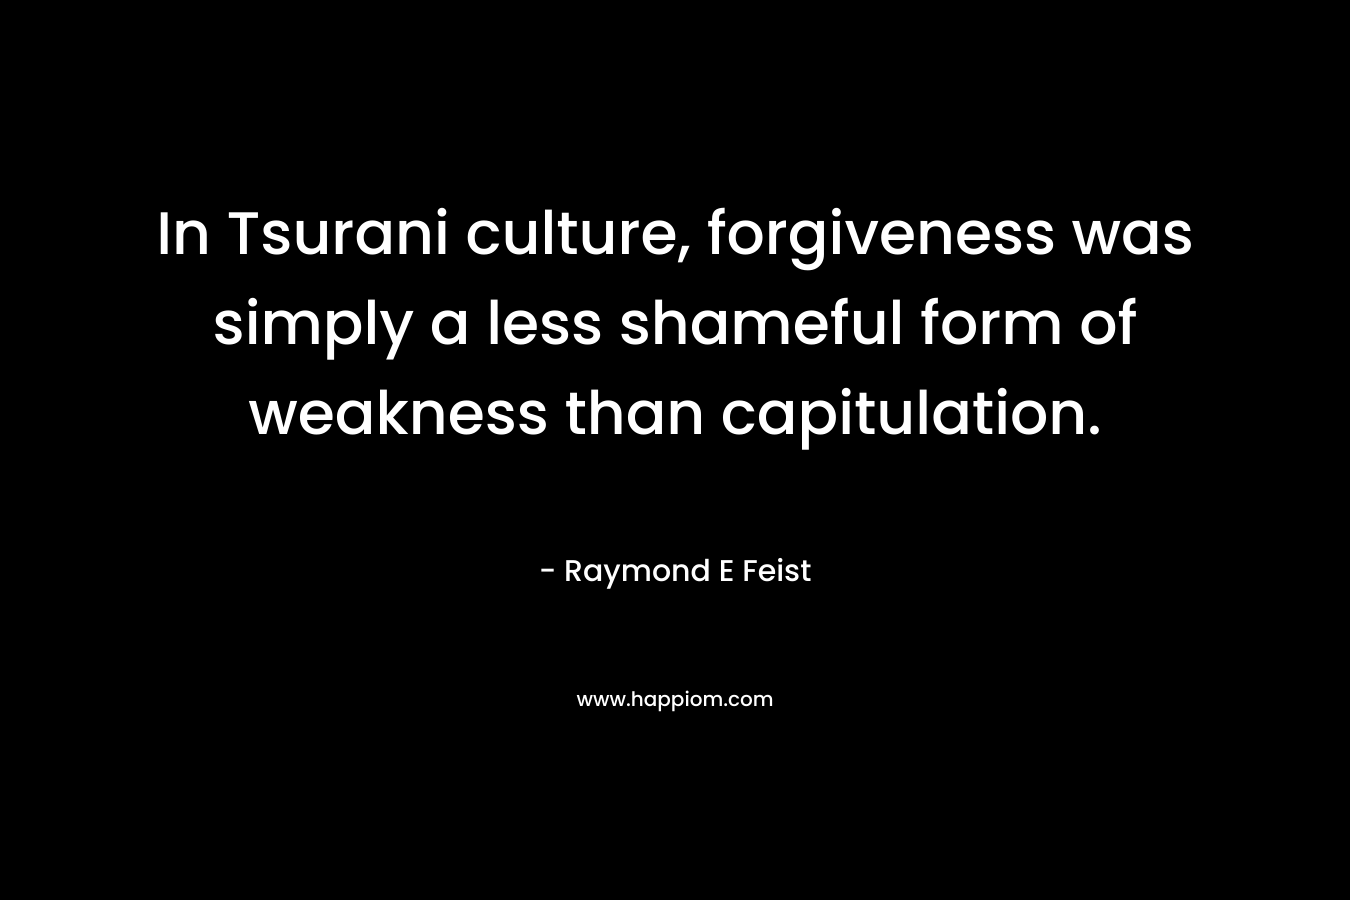 In Tsurani culture, forgiveness was simply a less shameful form of weakness than capitulation. – Raymond E Feist